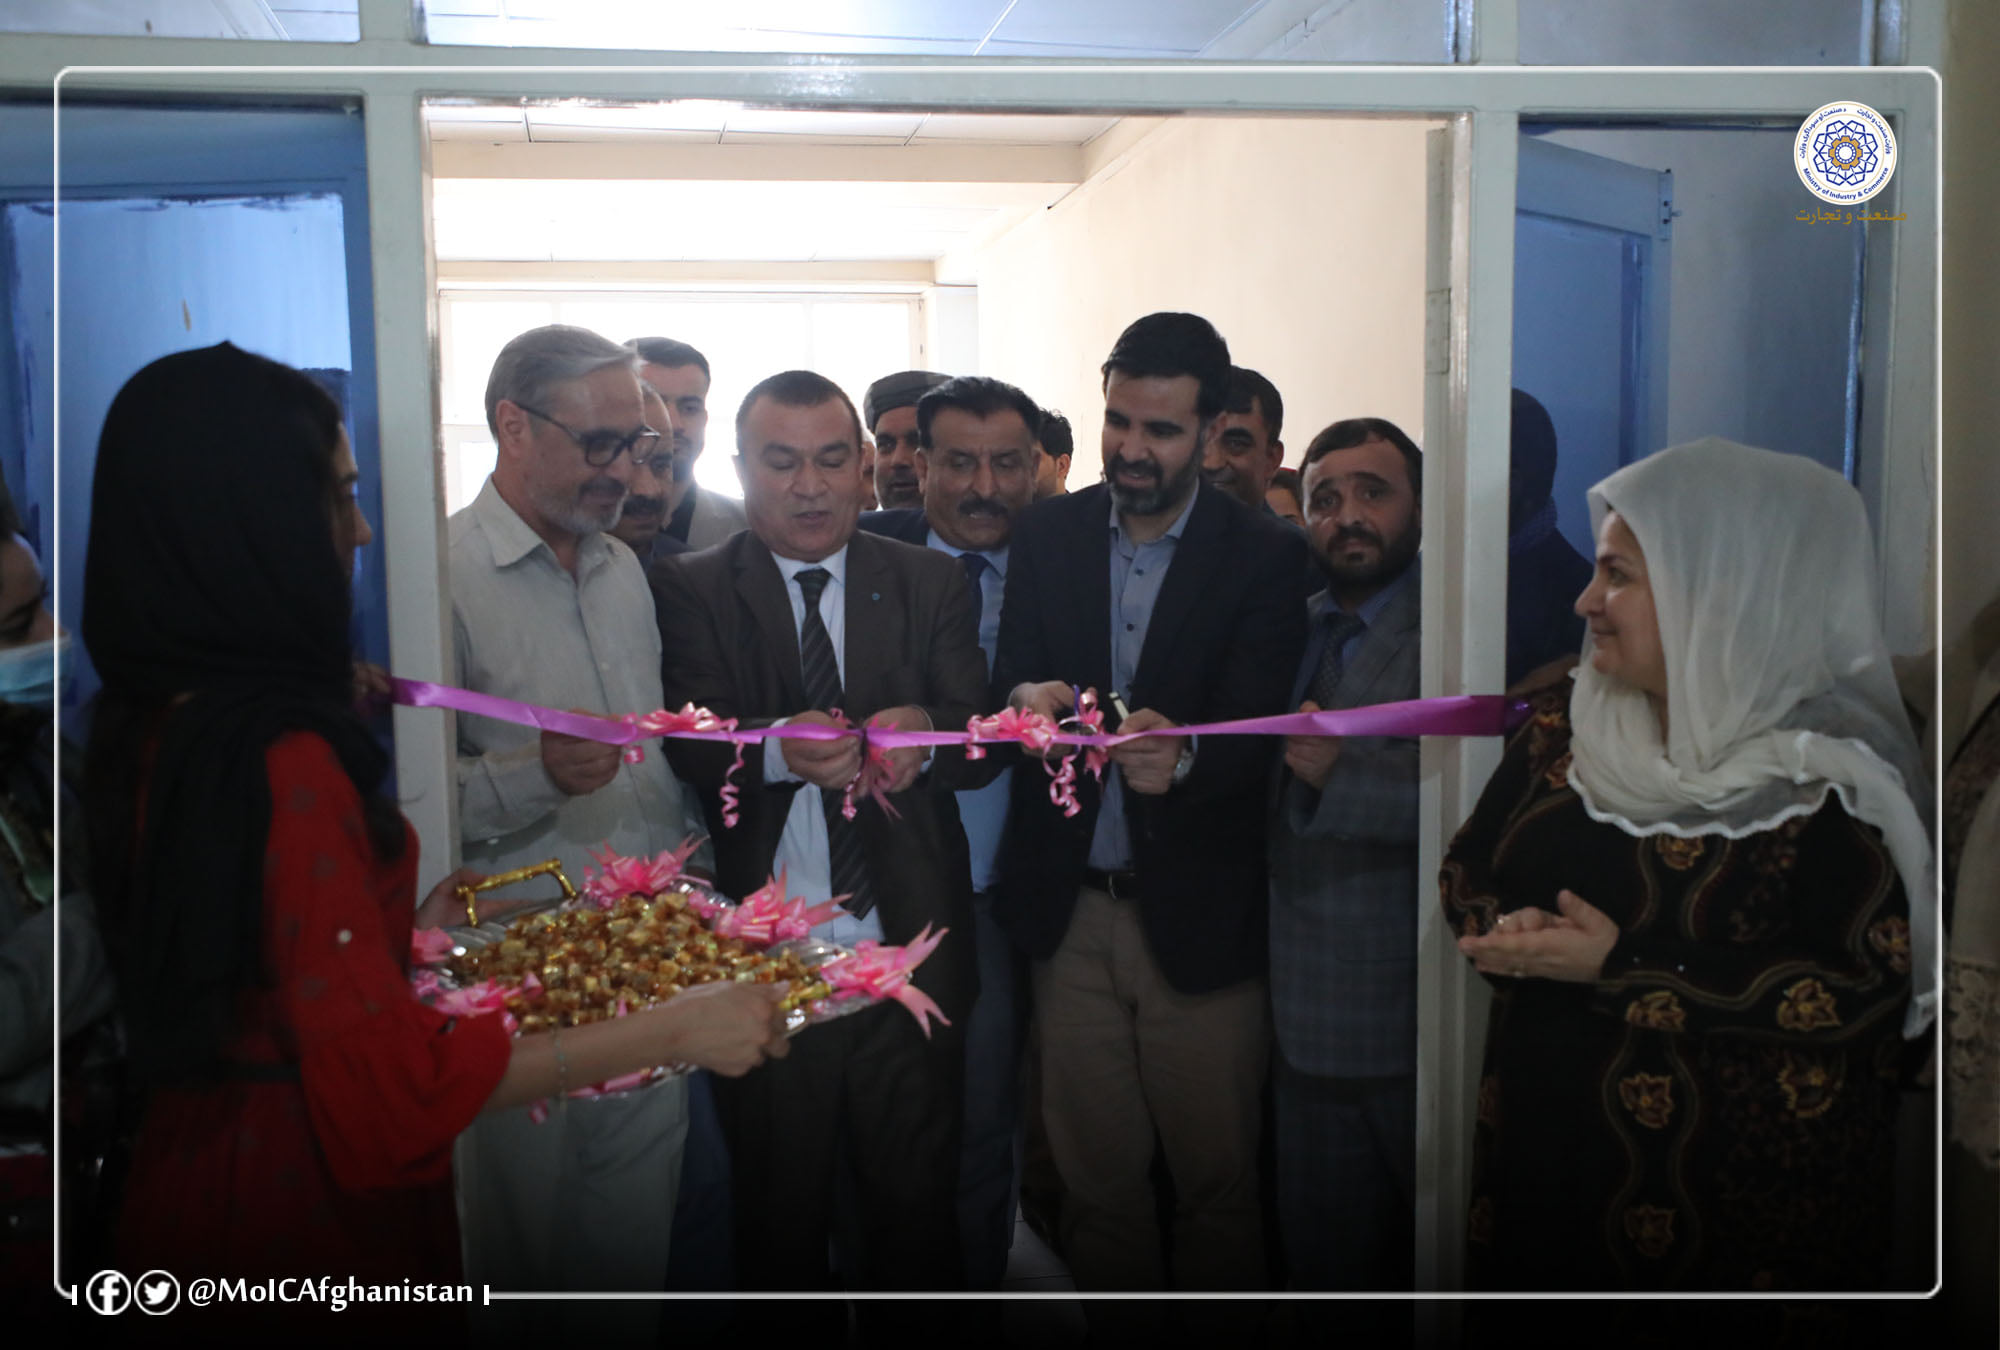 Inauguration of the Documenting Export Products One-Stop-Shop Center in Balkh province